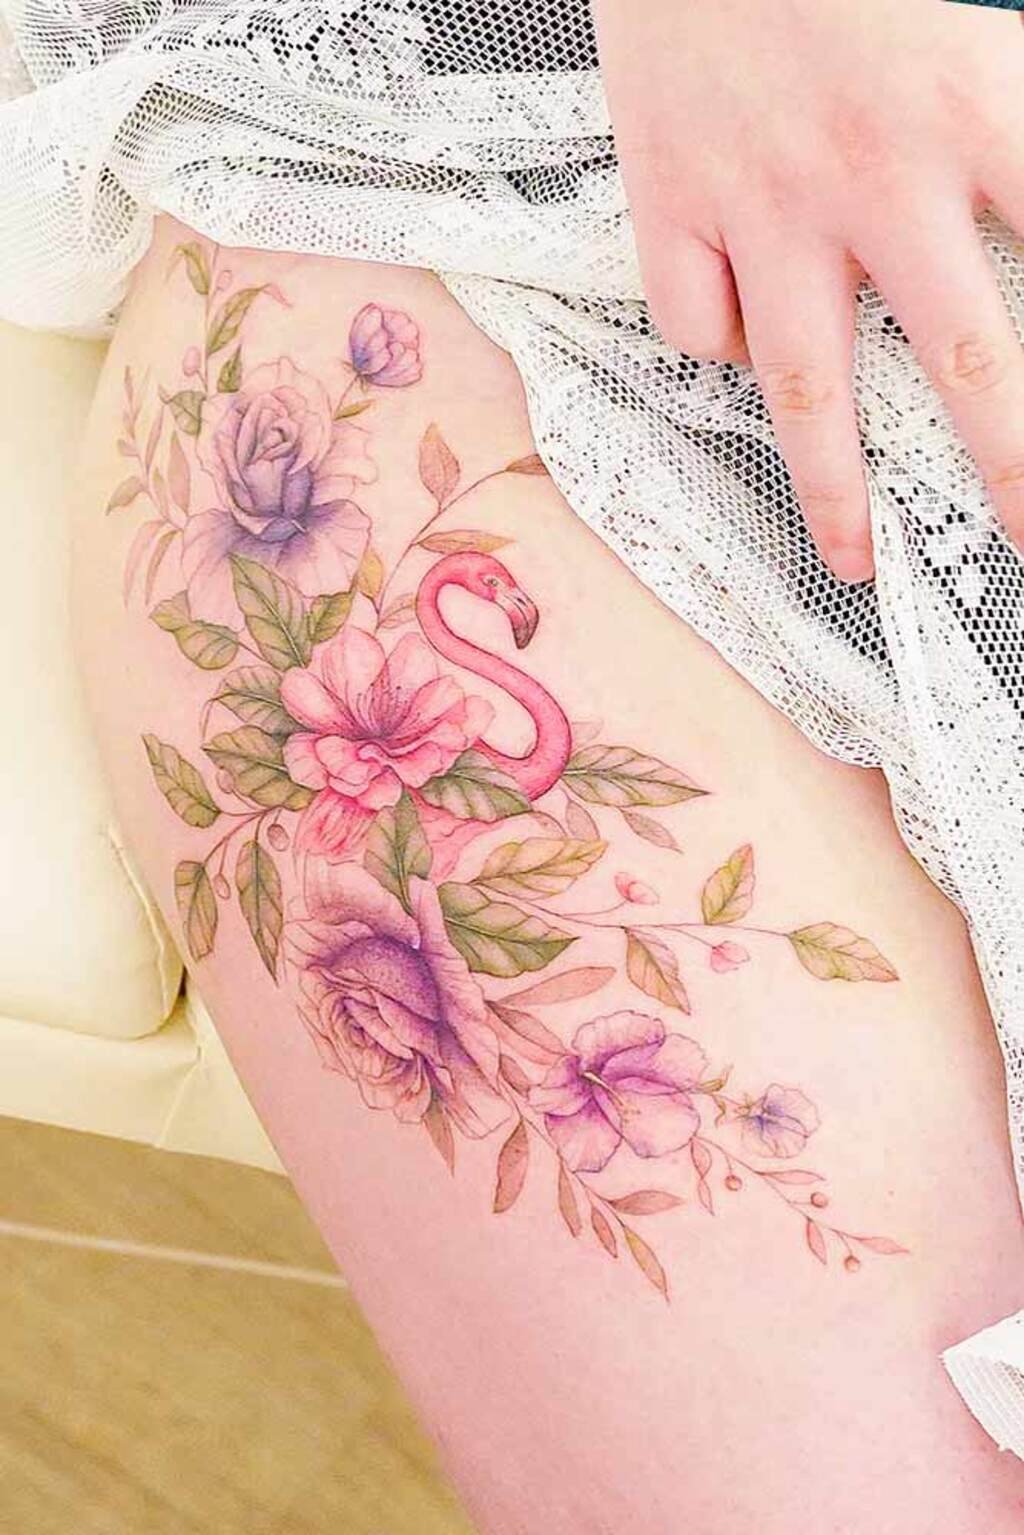 attractive women's small thigh tattoos